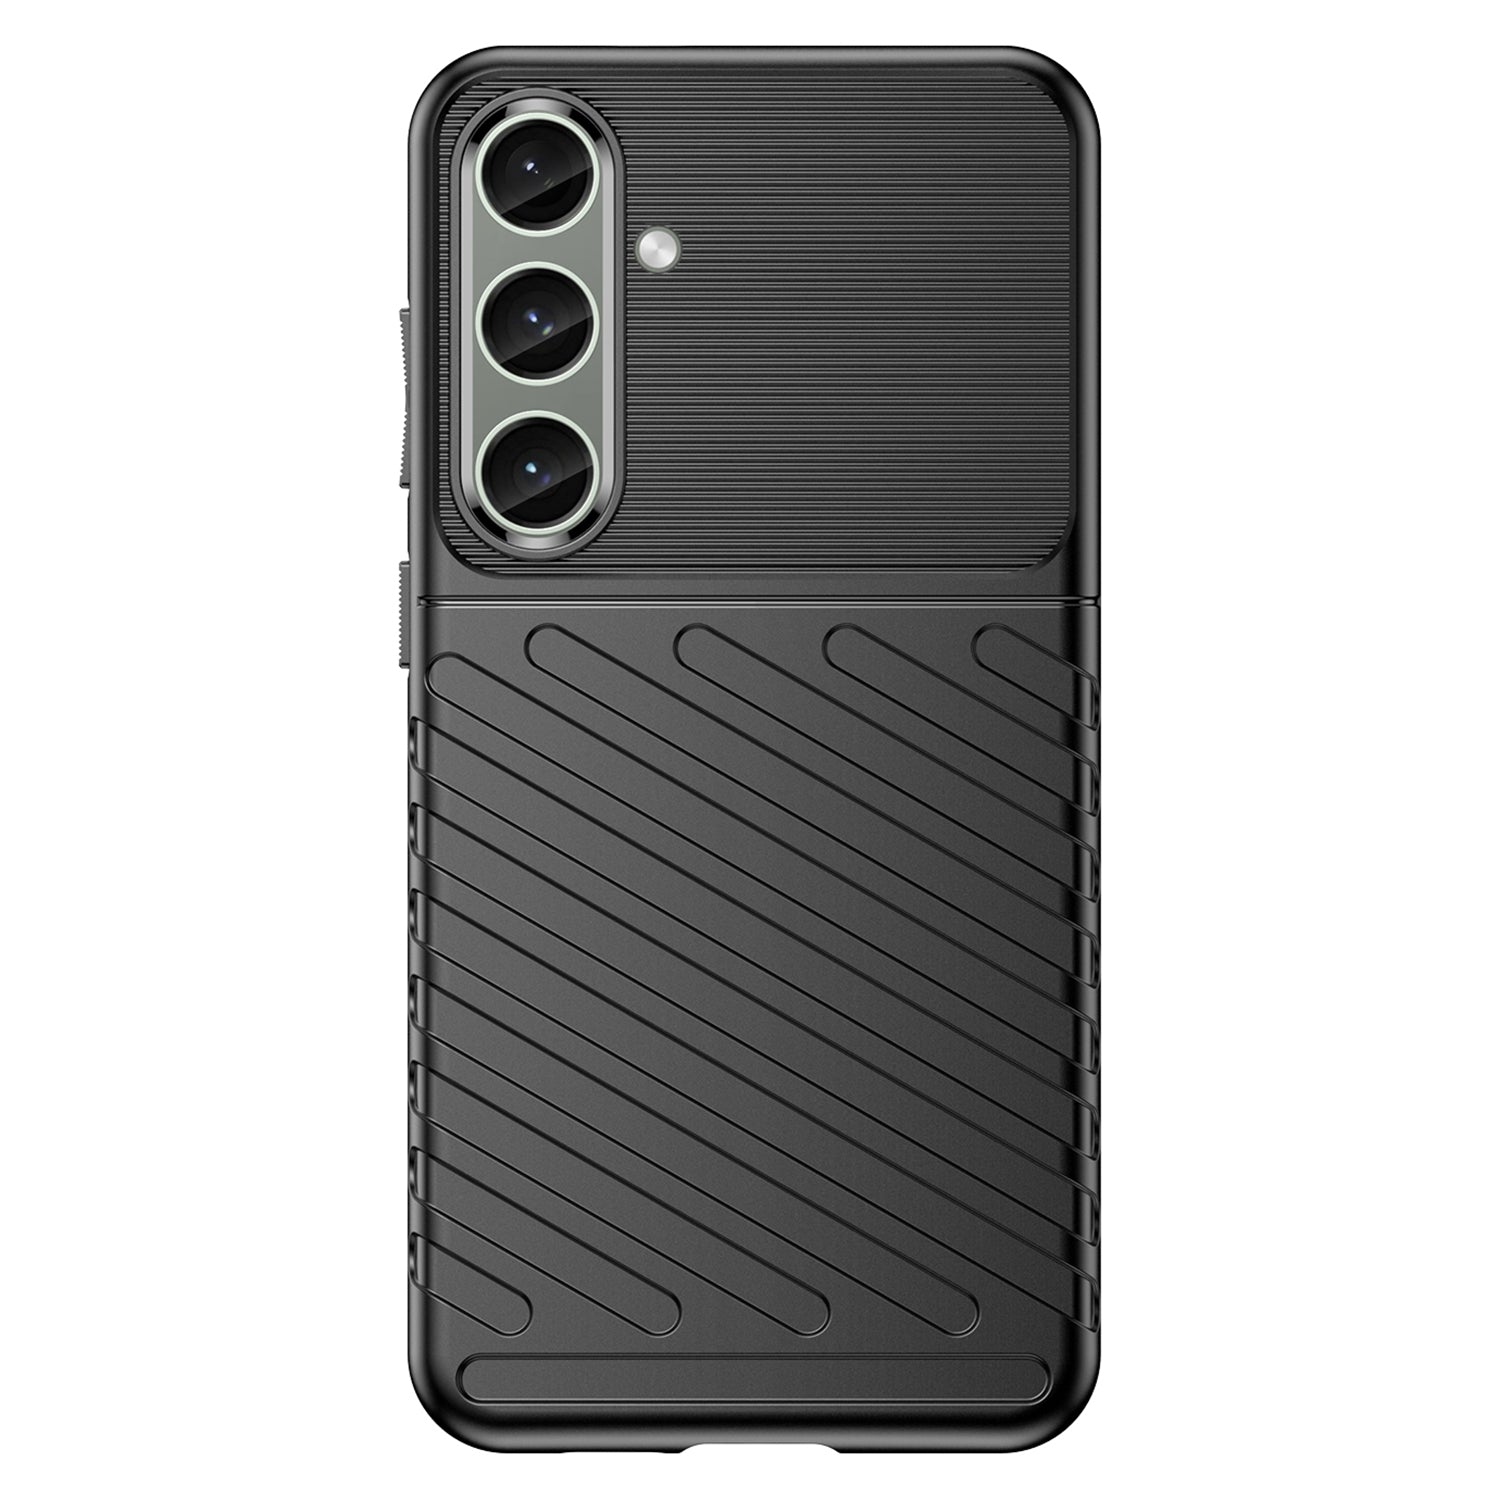 Thunder Series For Samsung Galaxy S24+ Cell Phone Cover Slim-Fit TPU Protective Shell Case - Black